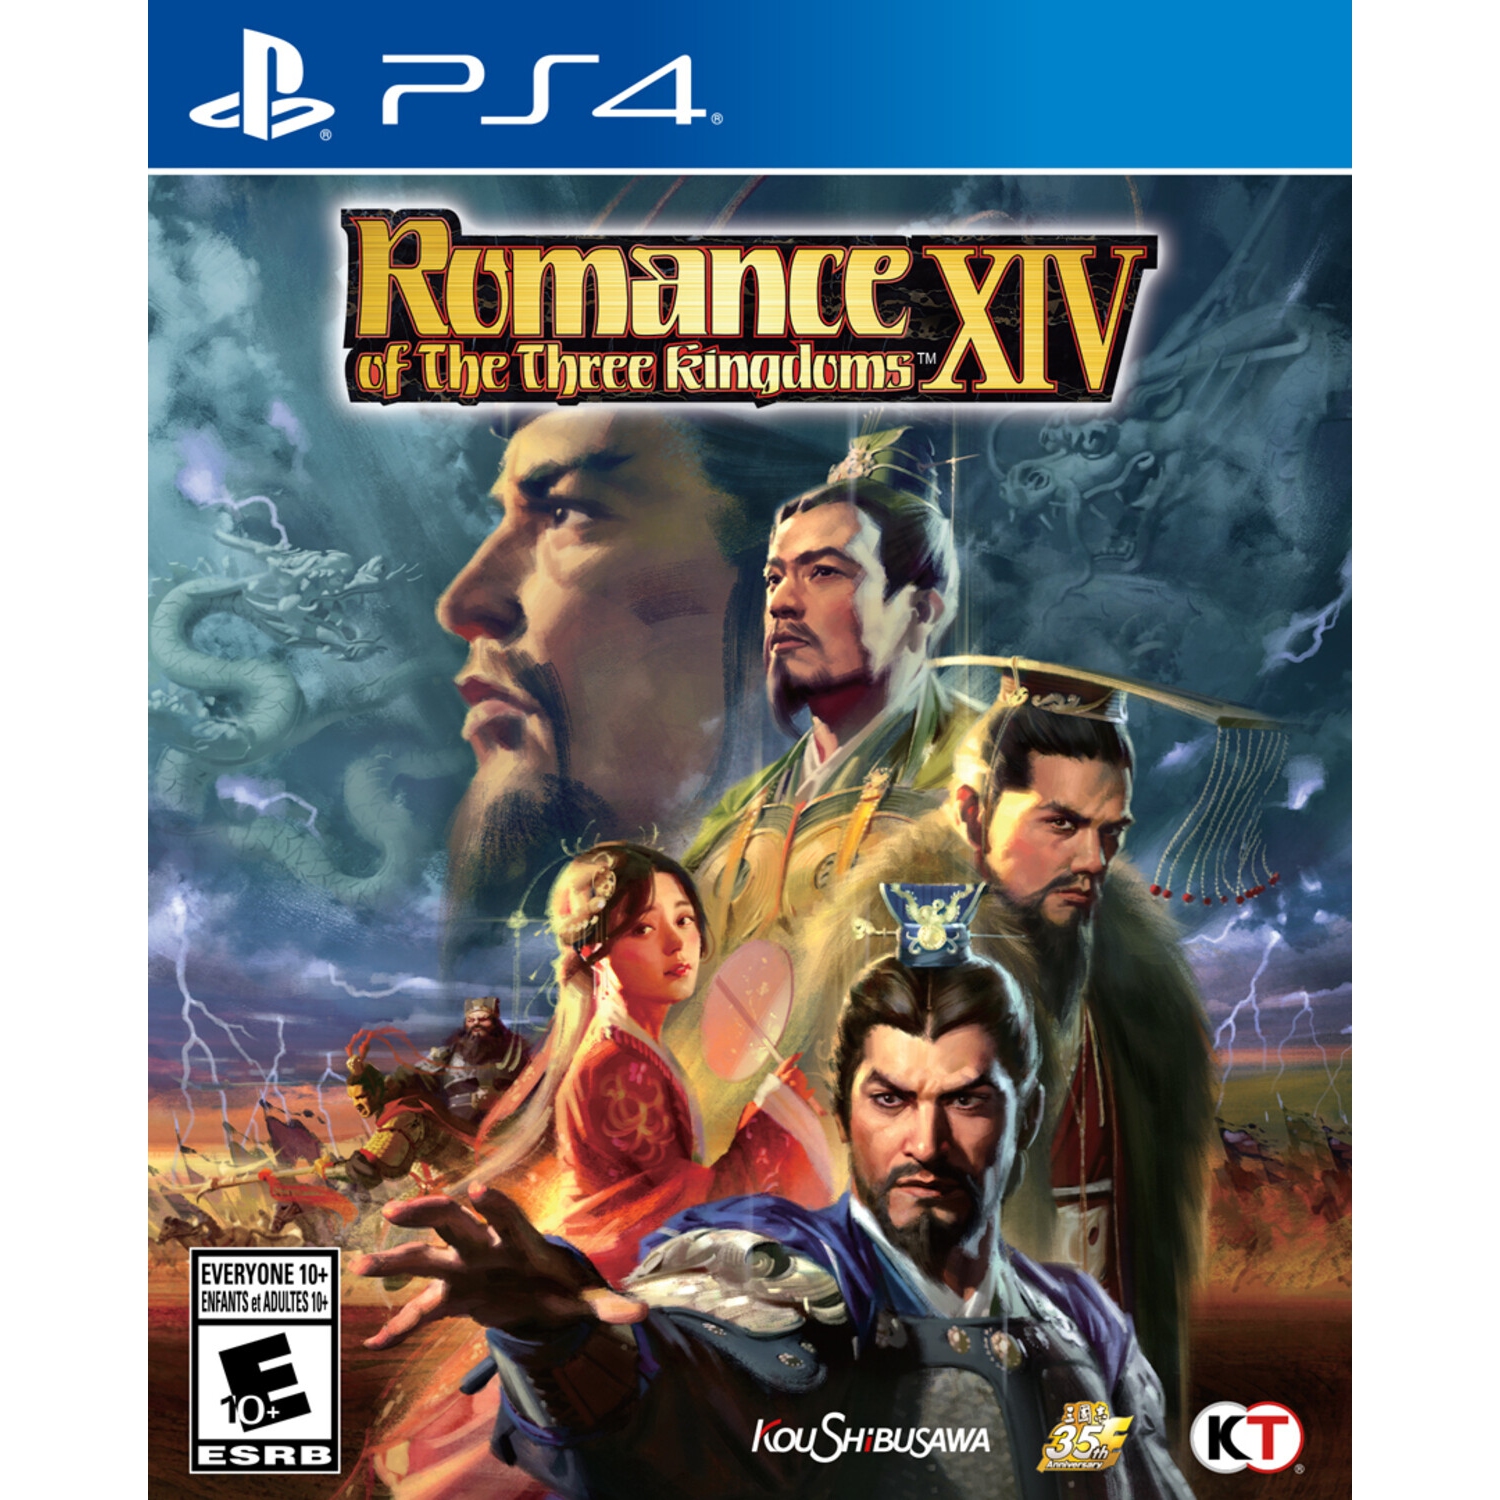 Romance of the Three Kingdoms XIV for PlayStation 4 [VIDEOGAMES]